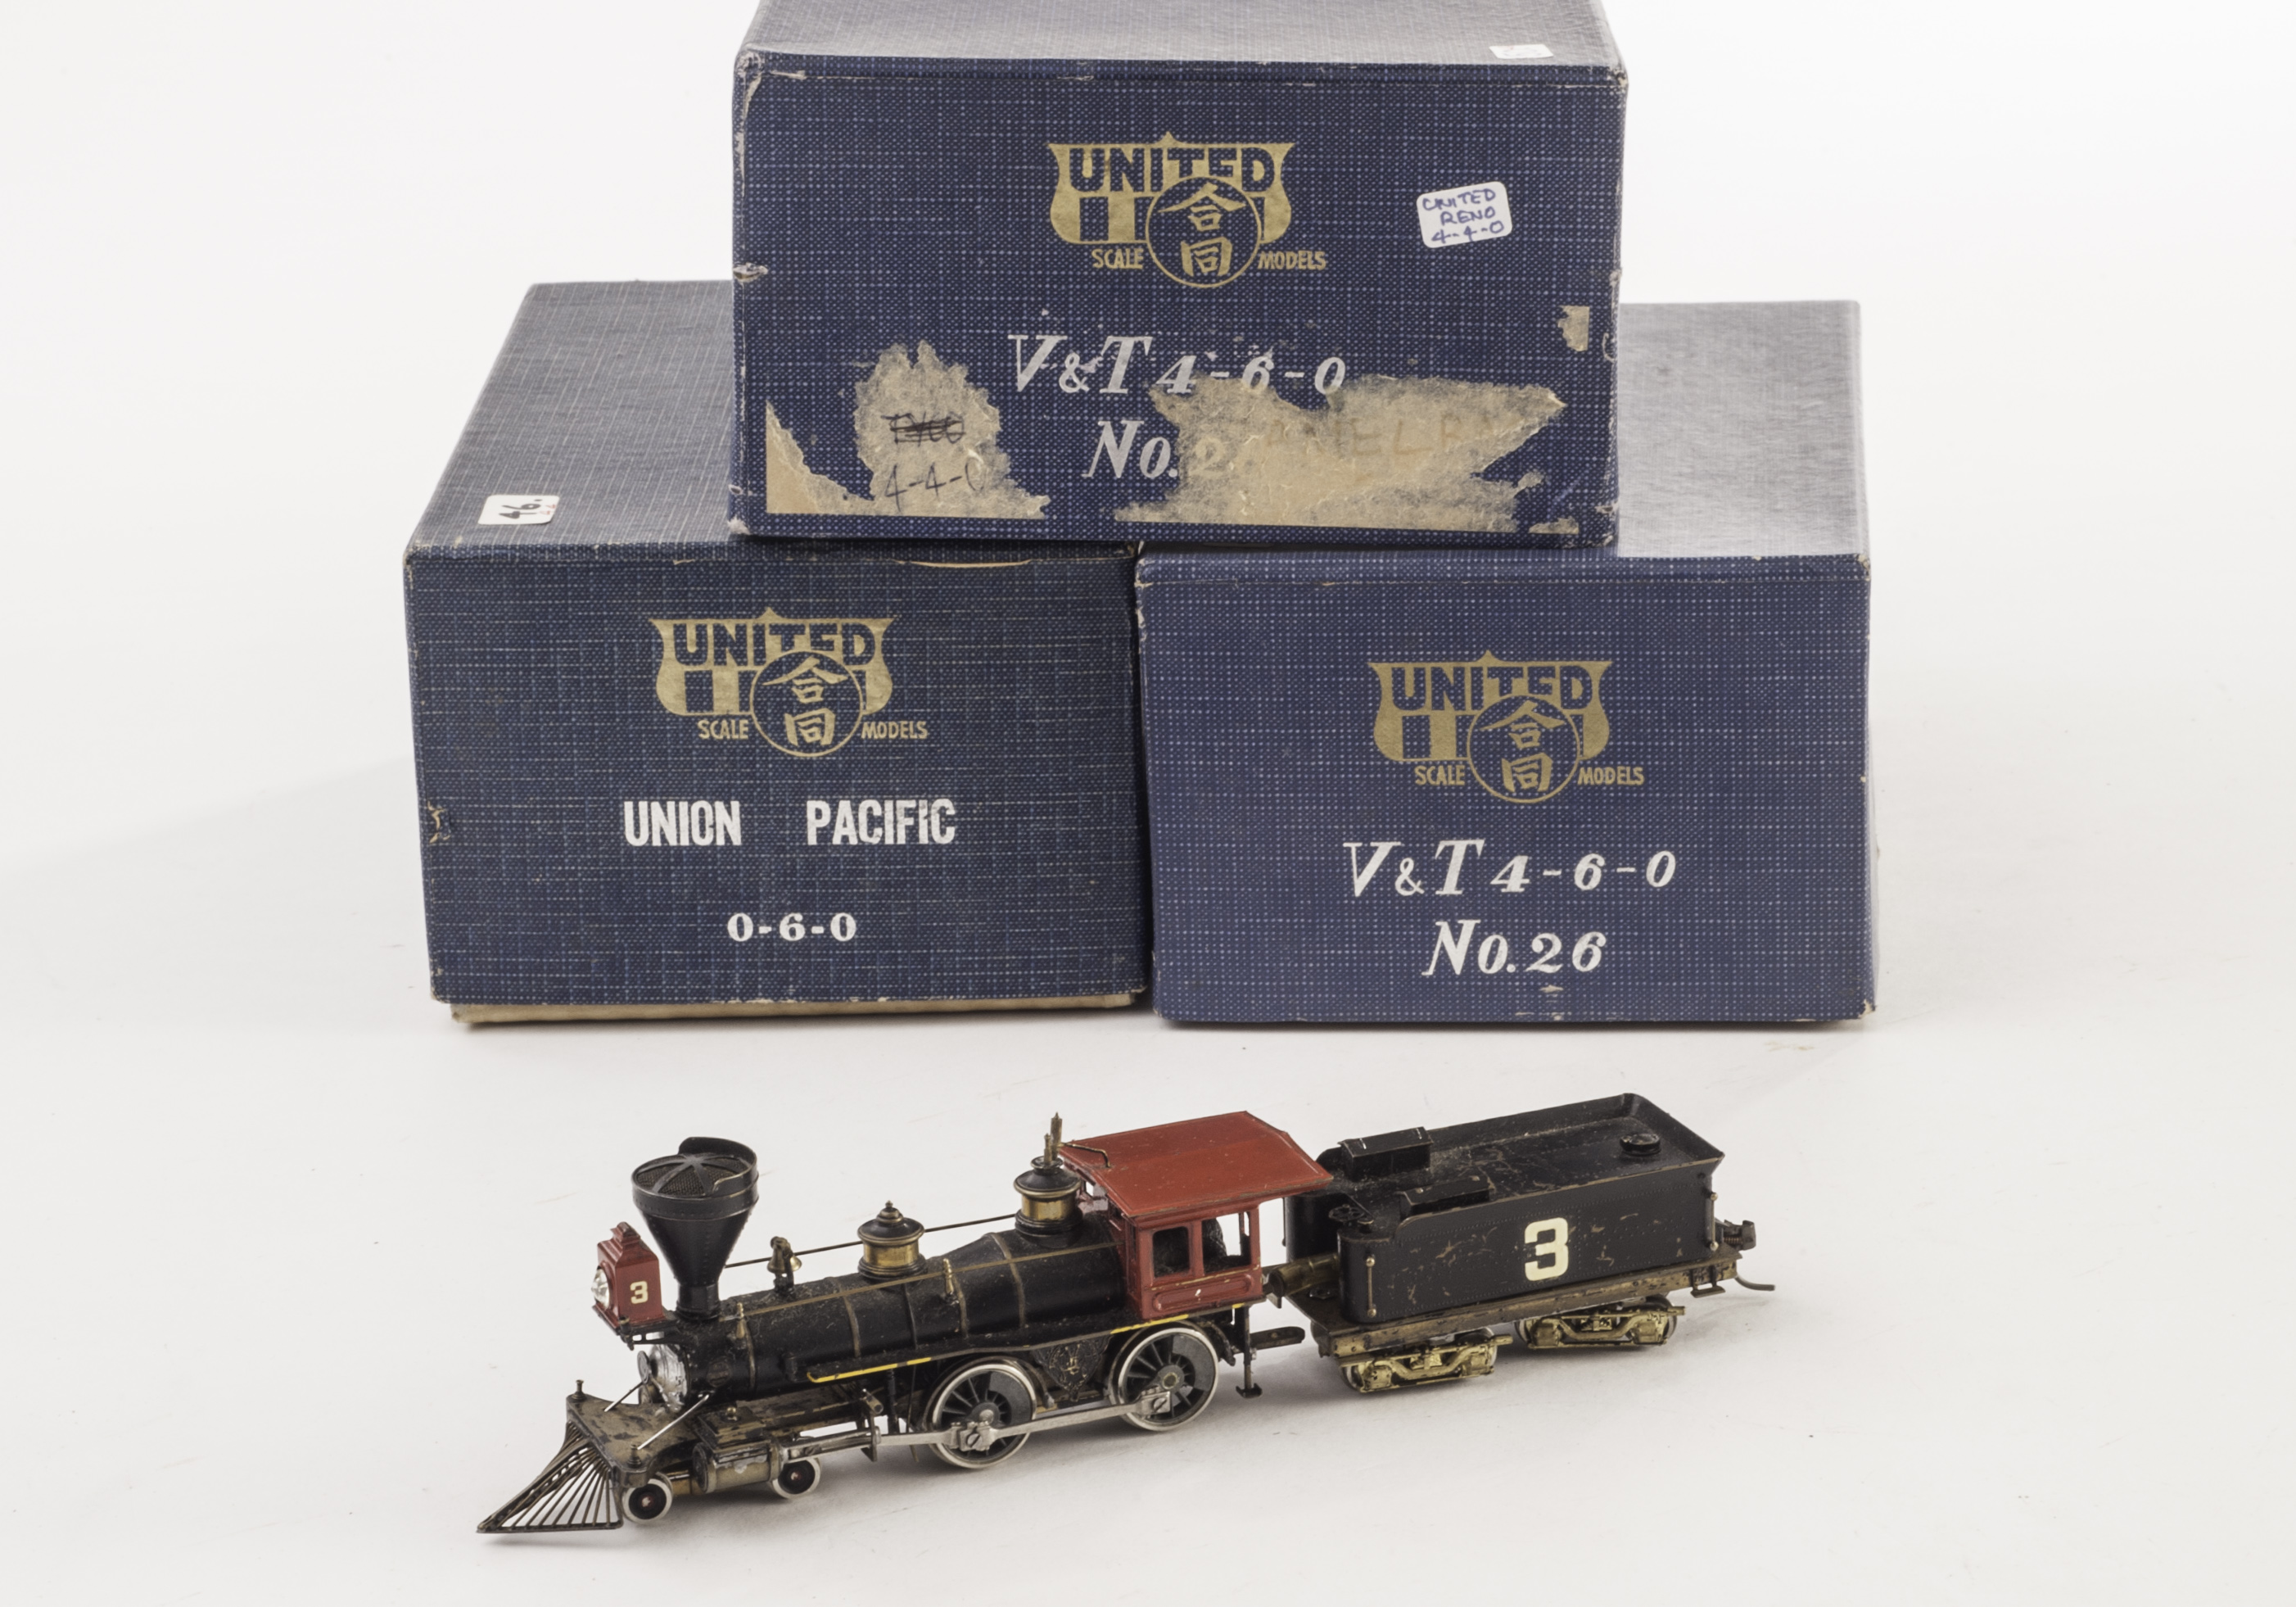 American HO scale Japanese brass locomotives by United Models: comprising Union Pacific 0-6-0